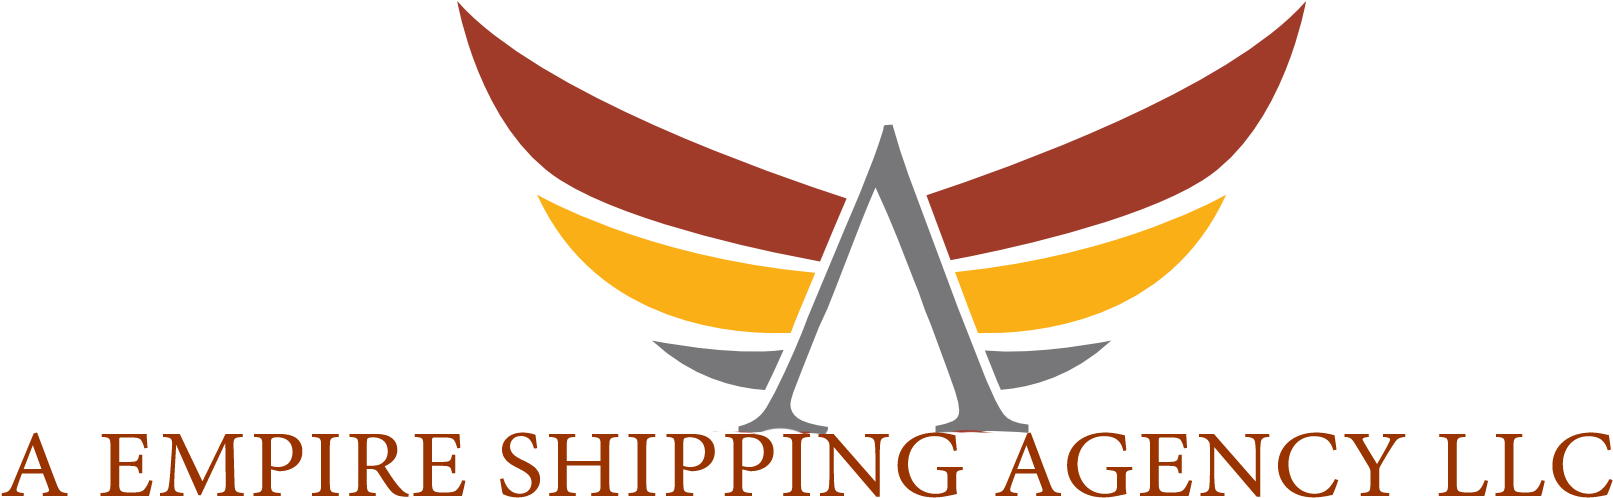 Air Shipment Tracking System, Sea Shipment Tracking - Graphic Design (1891x507)